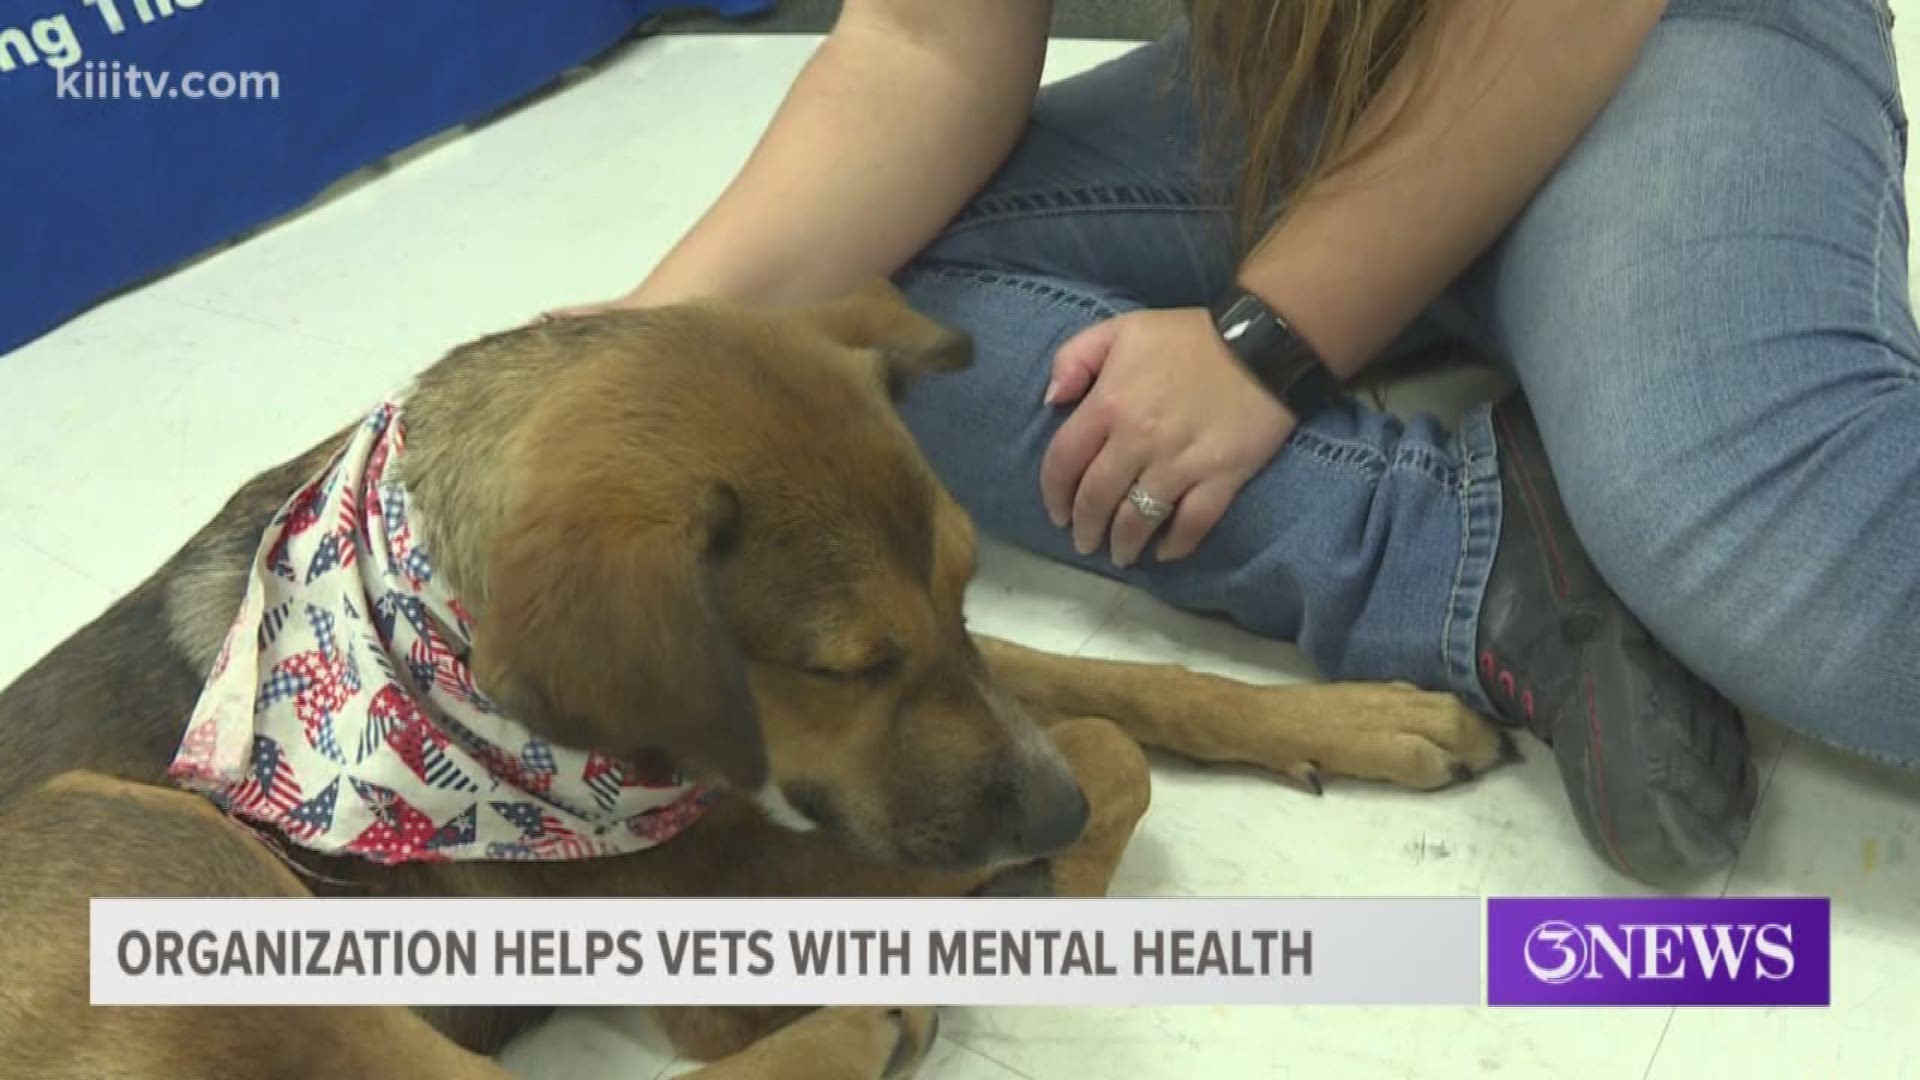 Improving the lives of area veterans by pairing them up with pets was the goal of two Corpus Christi organizations Friday.